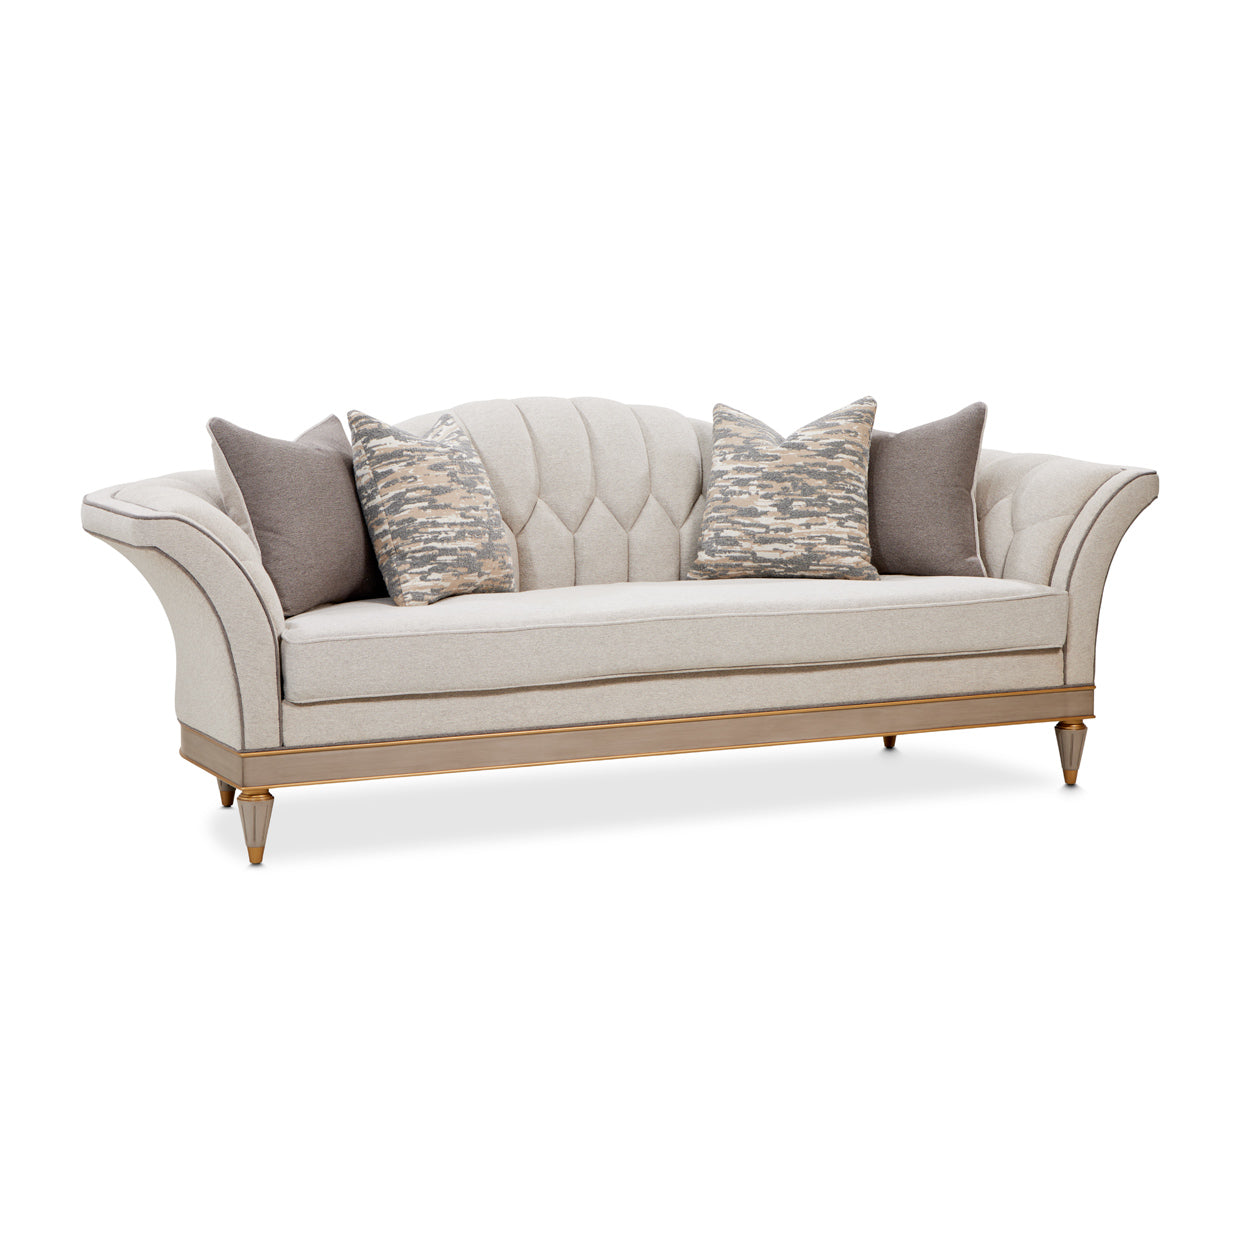 Standard Sofa Furniture,comfort,luxuriously soft touch,pillows,elegance and style